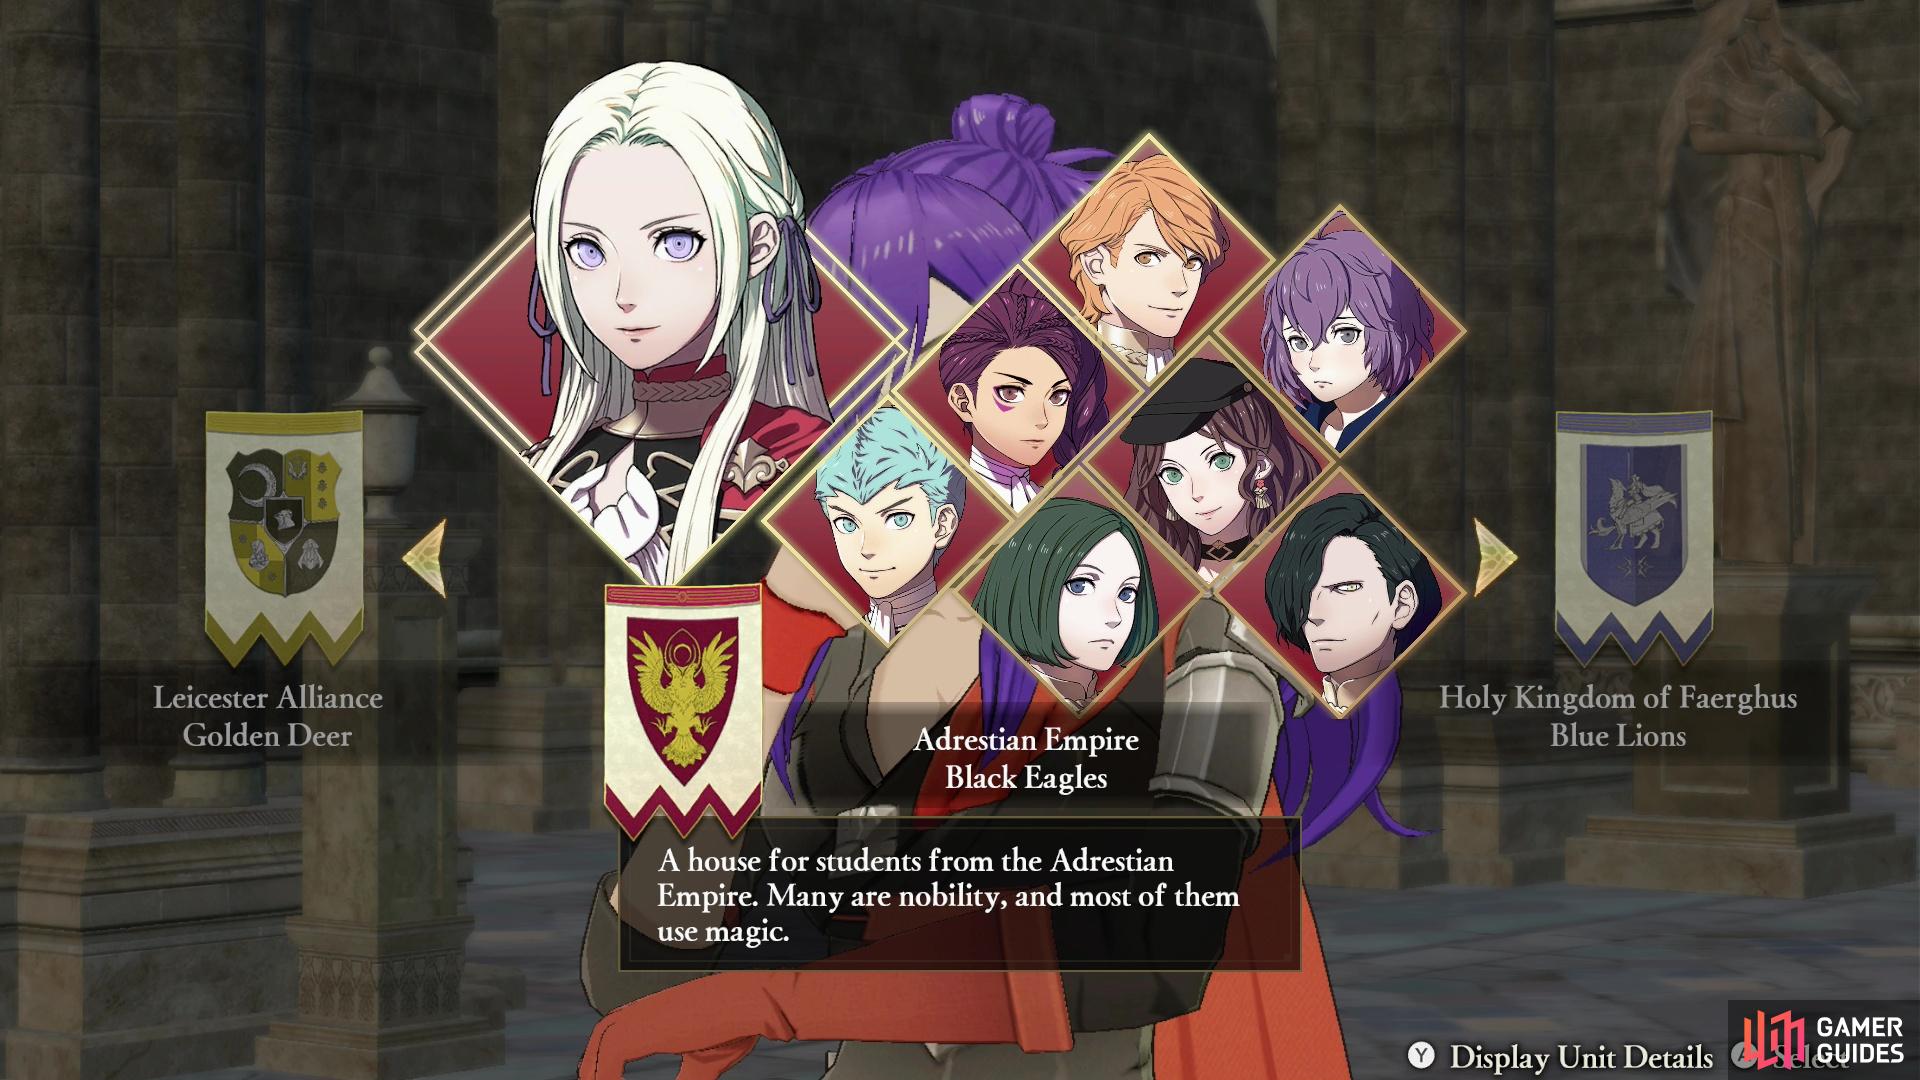 If you pick the Black Eagles, Bernadetta will be one of your starting characters.